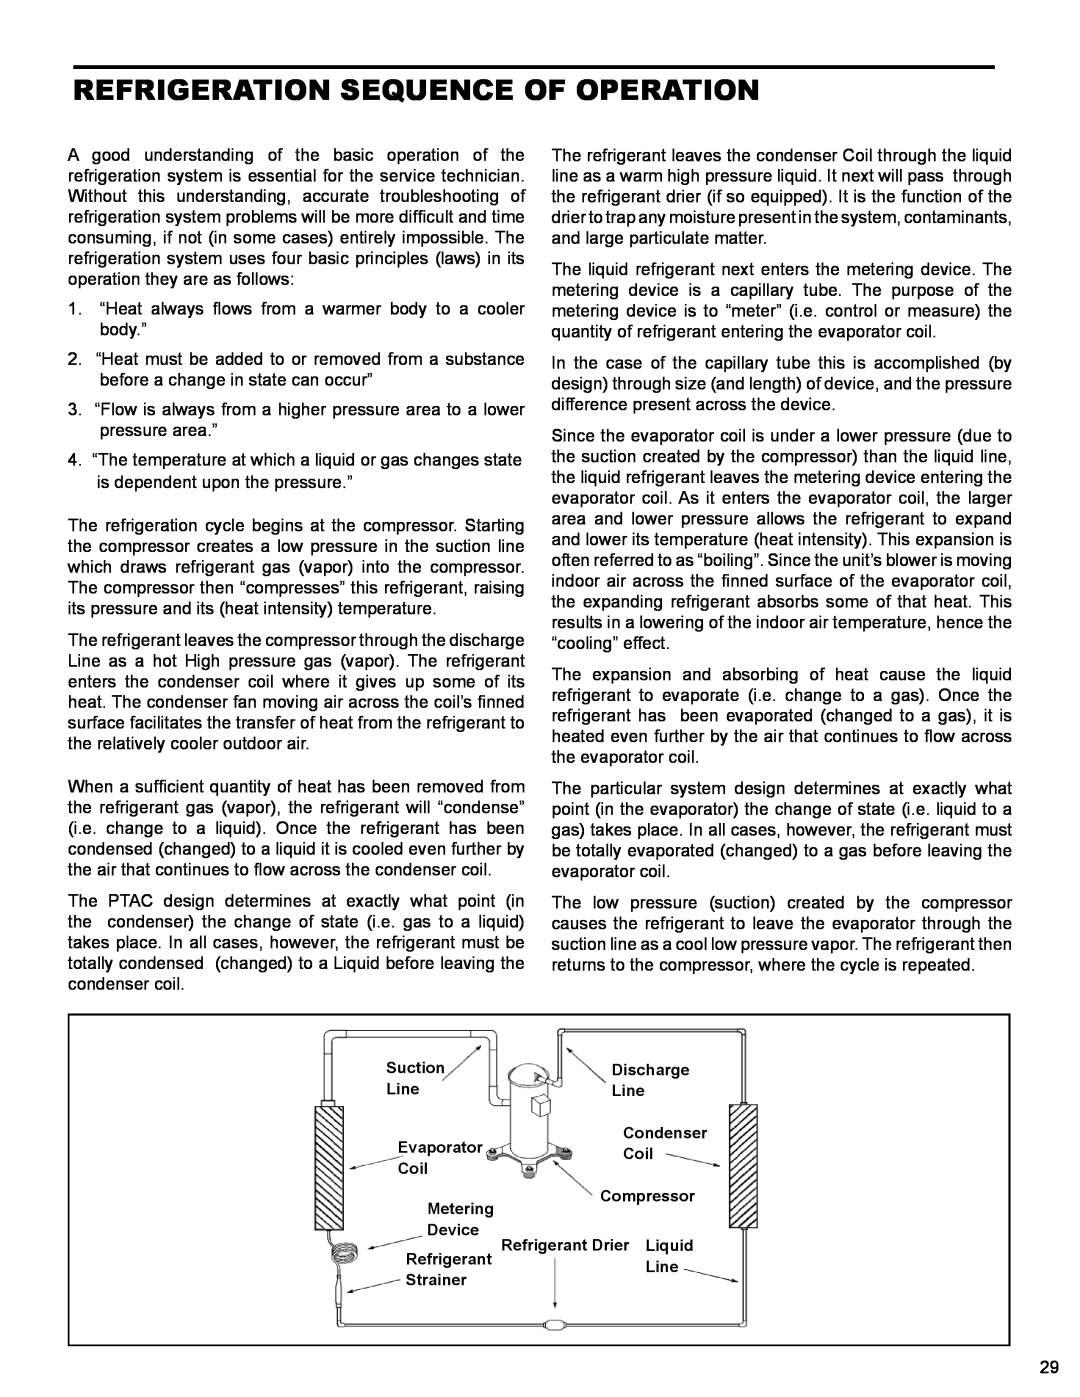 Friedrich PTAC - R410A service manual Refrigeration Sequence Of Operation 